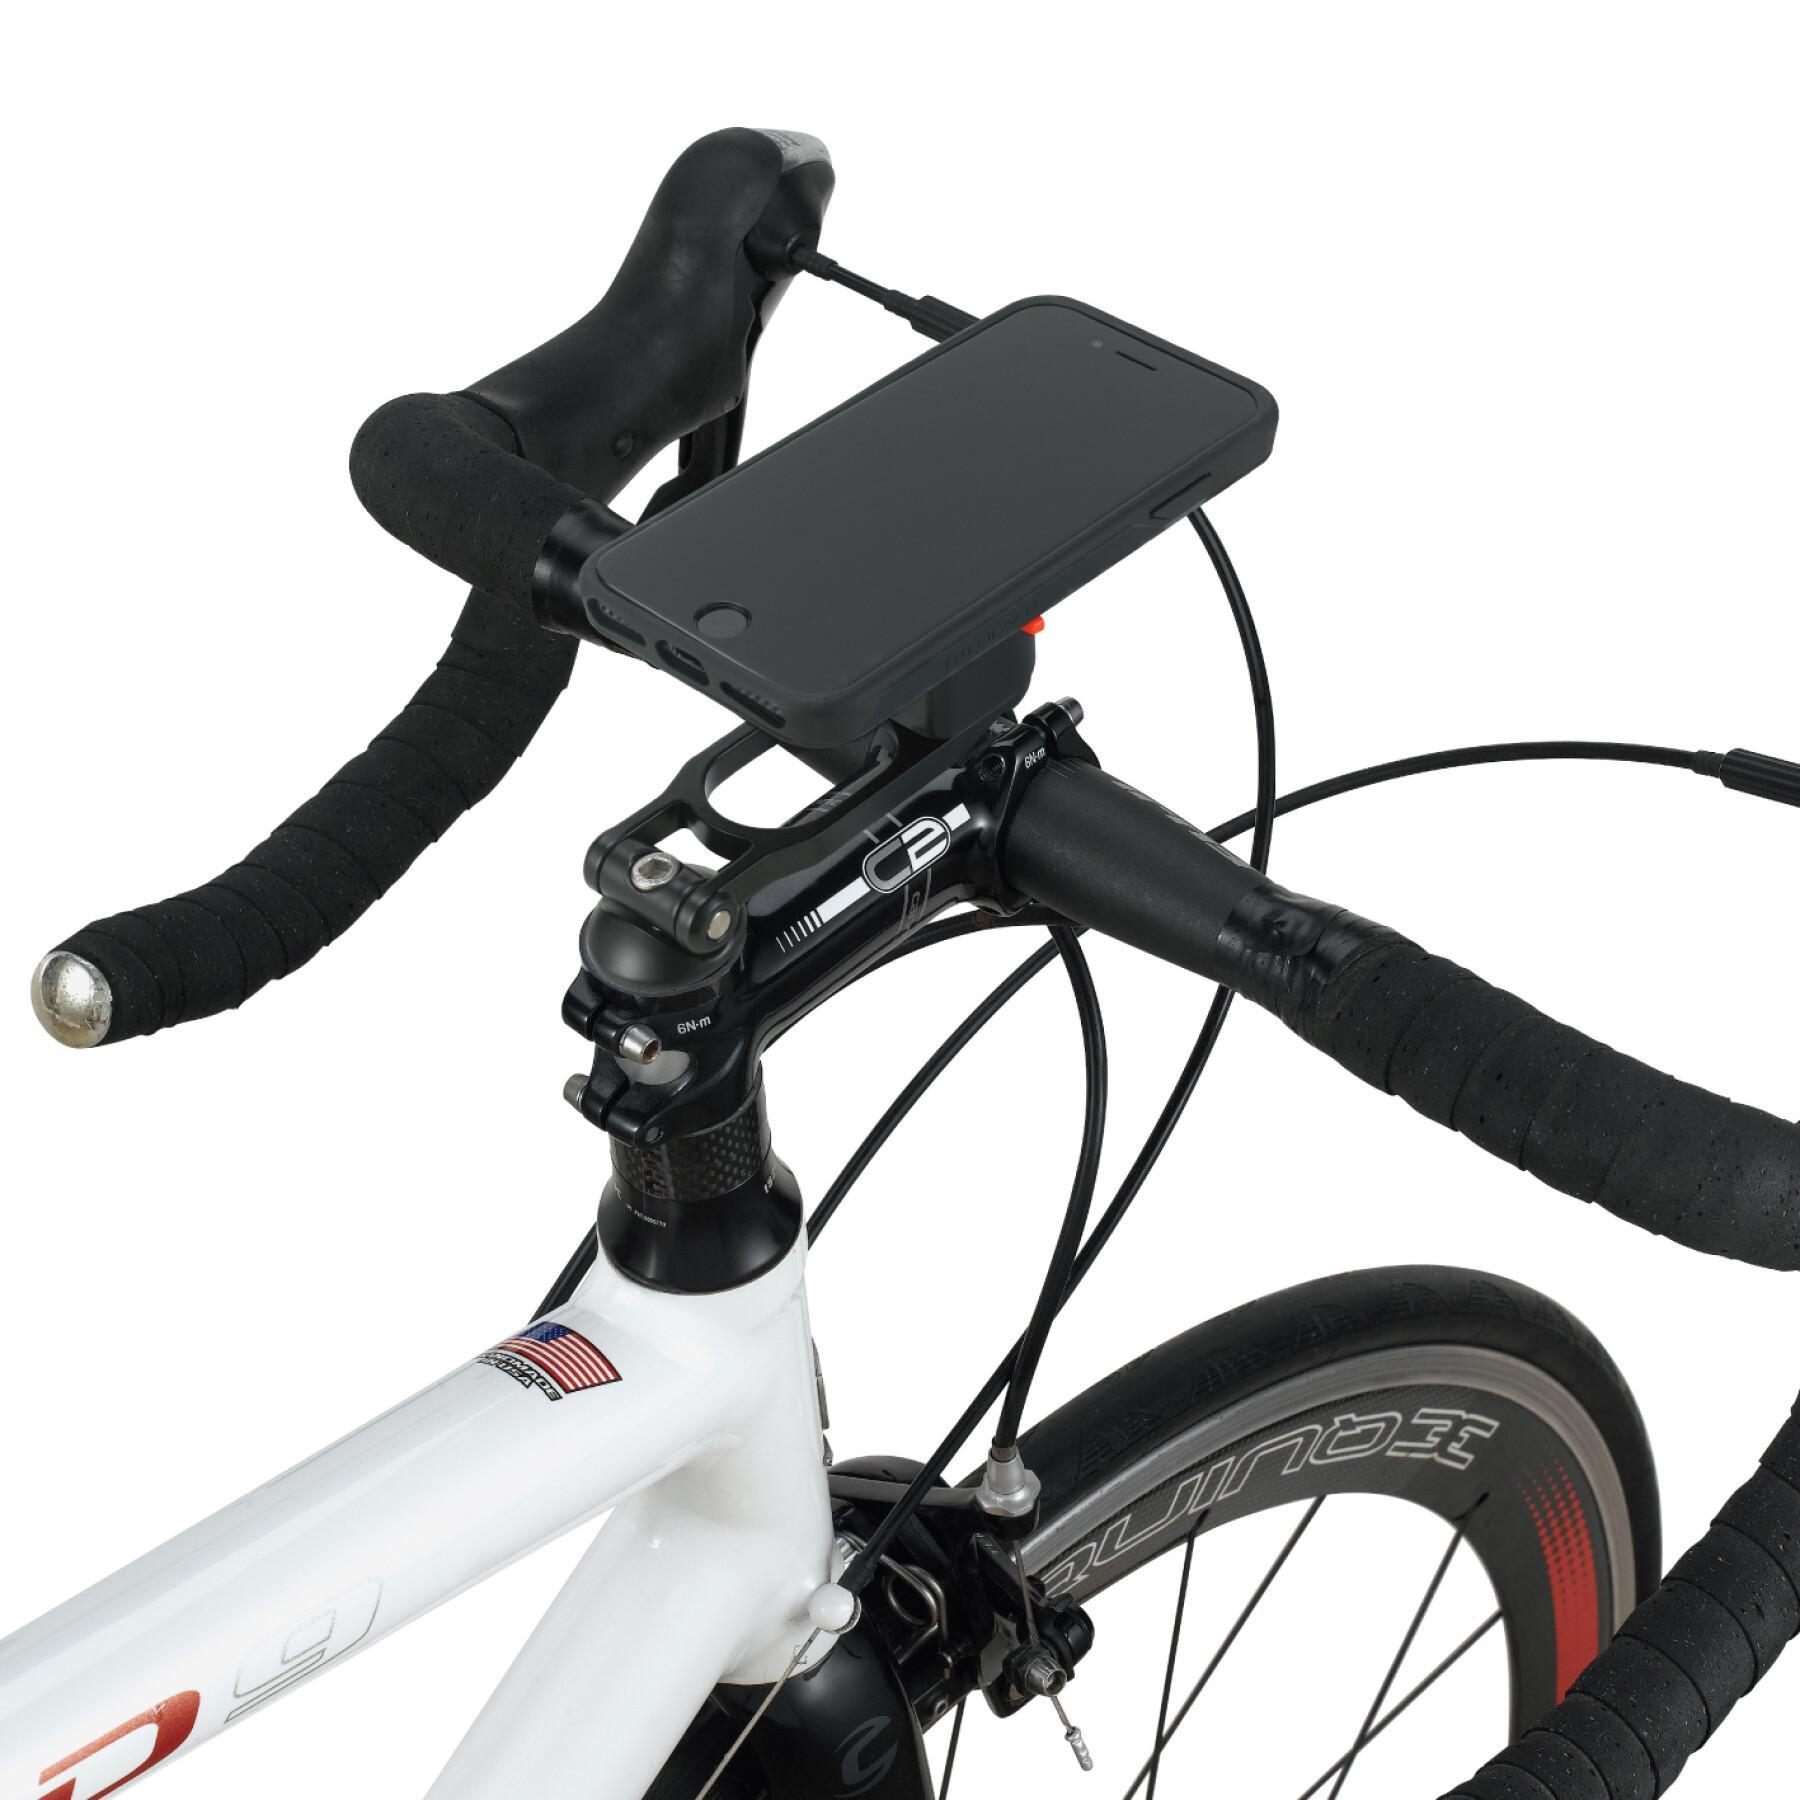 Support for handlebars and stems Tigra fit-clic néo